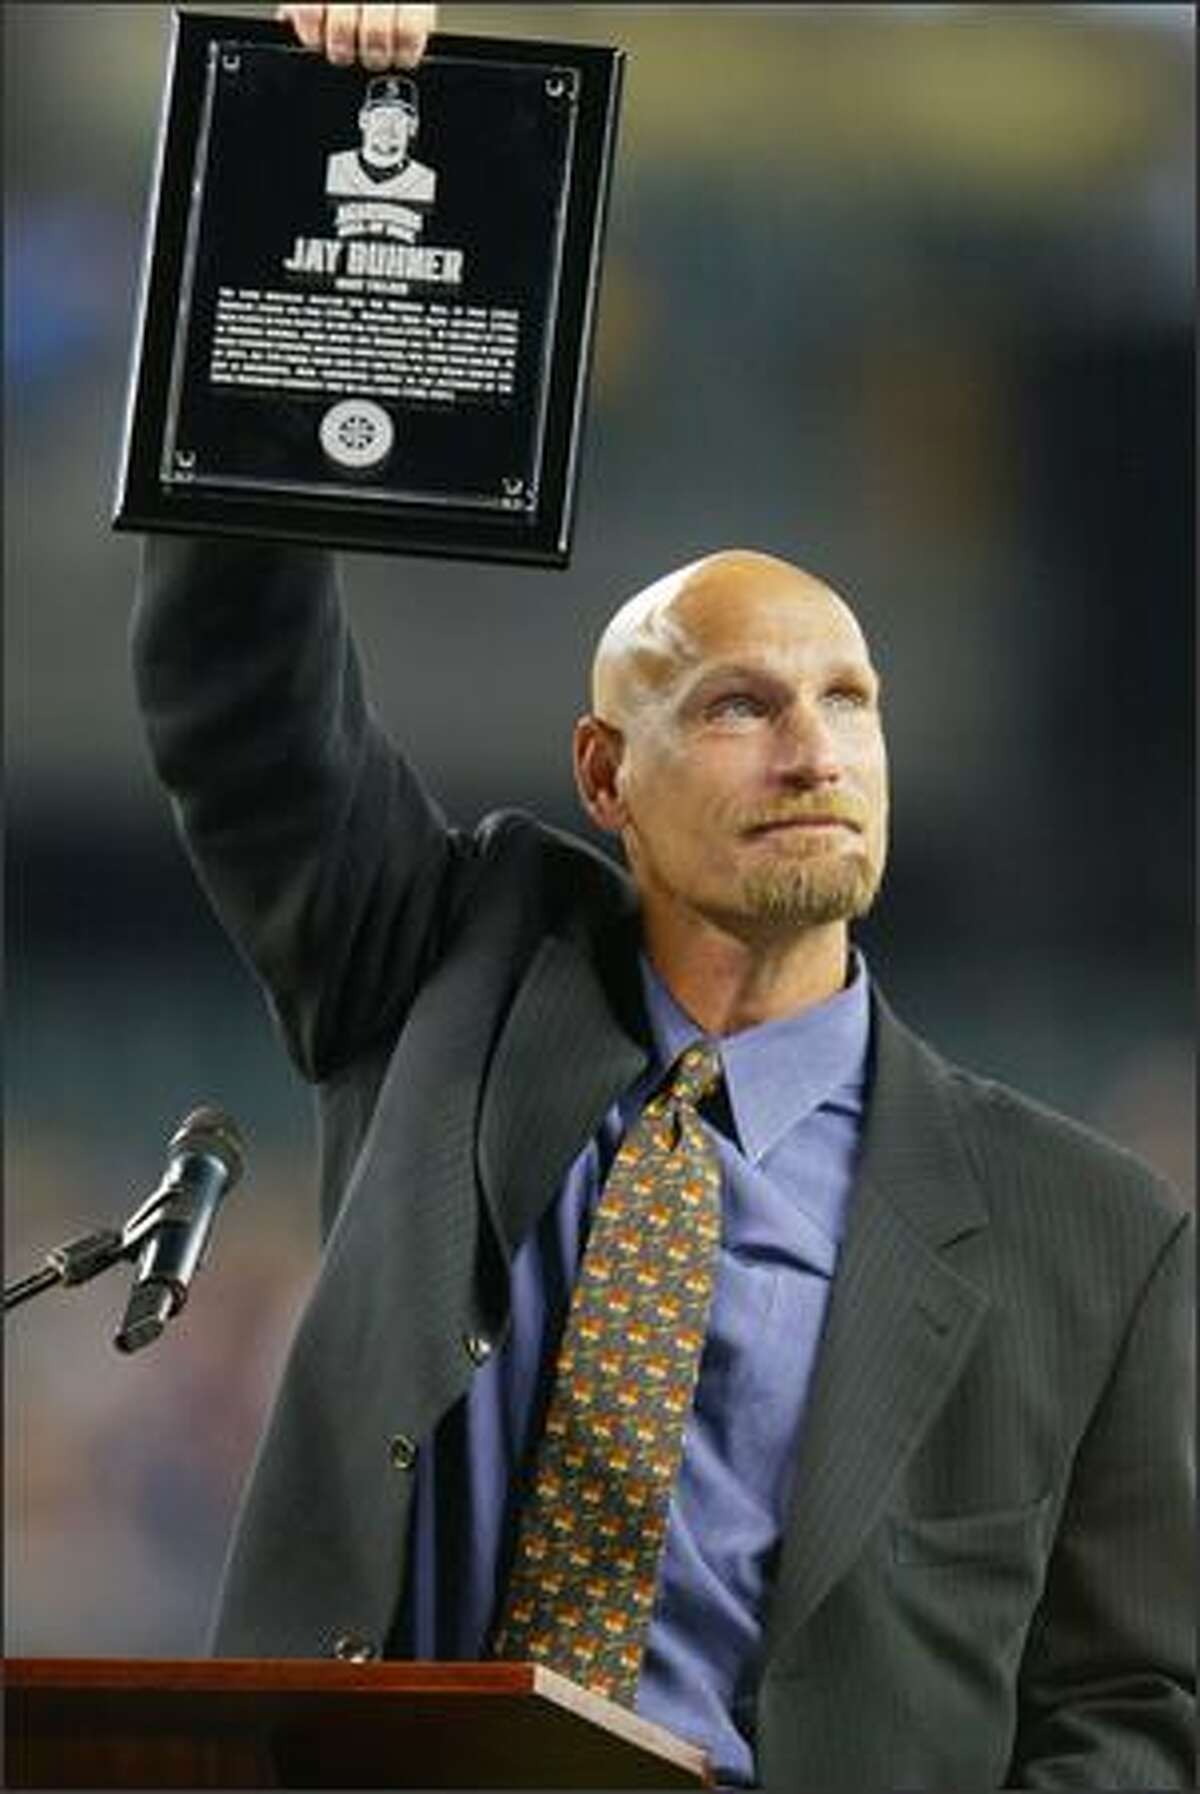 Jay Buhner shows his plaque to the crowd at end of the ceremony.